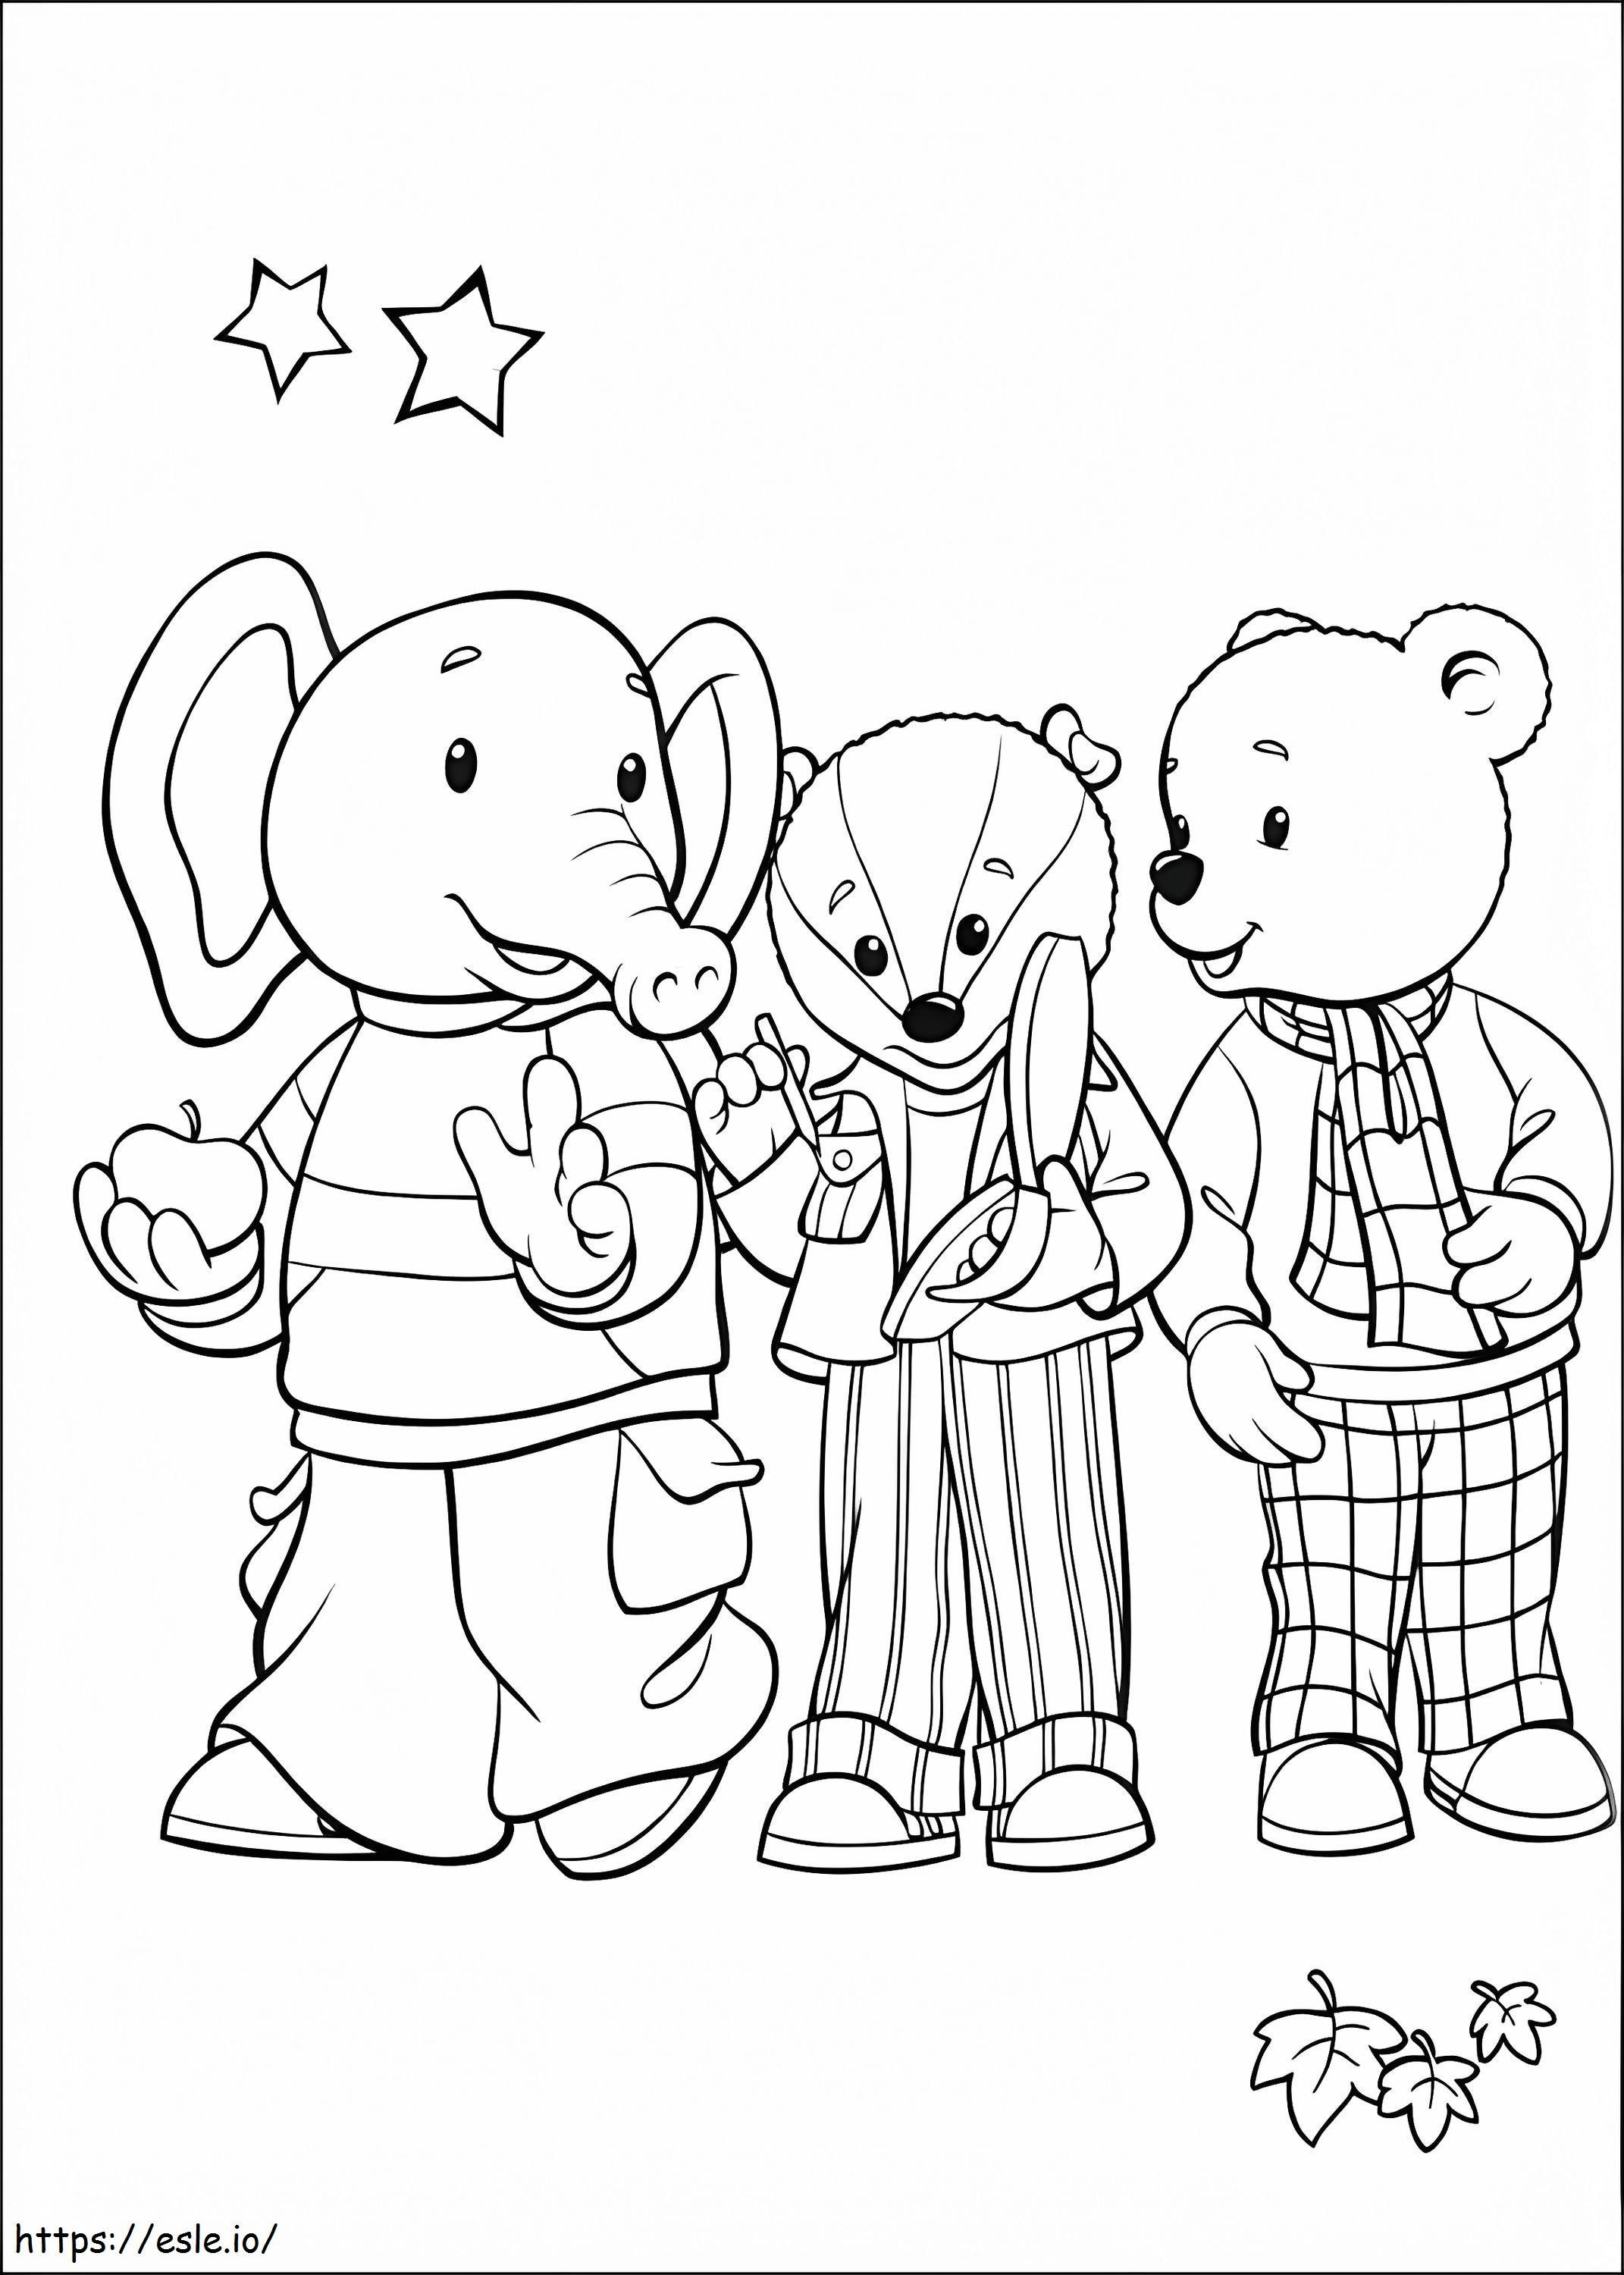 Talking About Rupert Bear coloring page